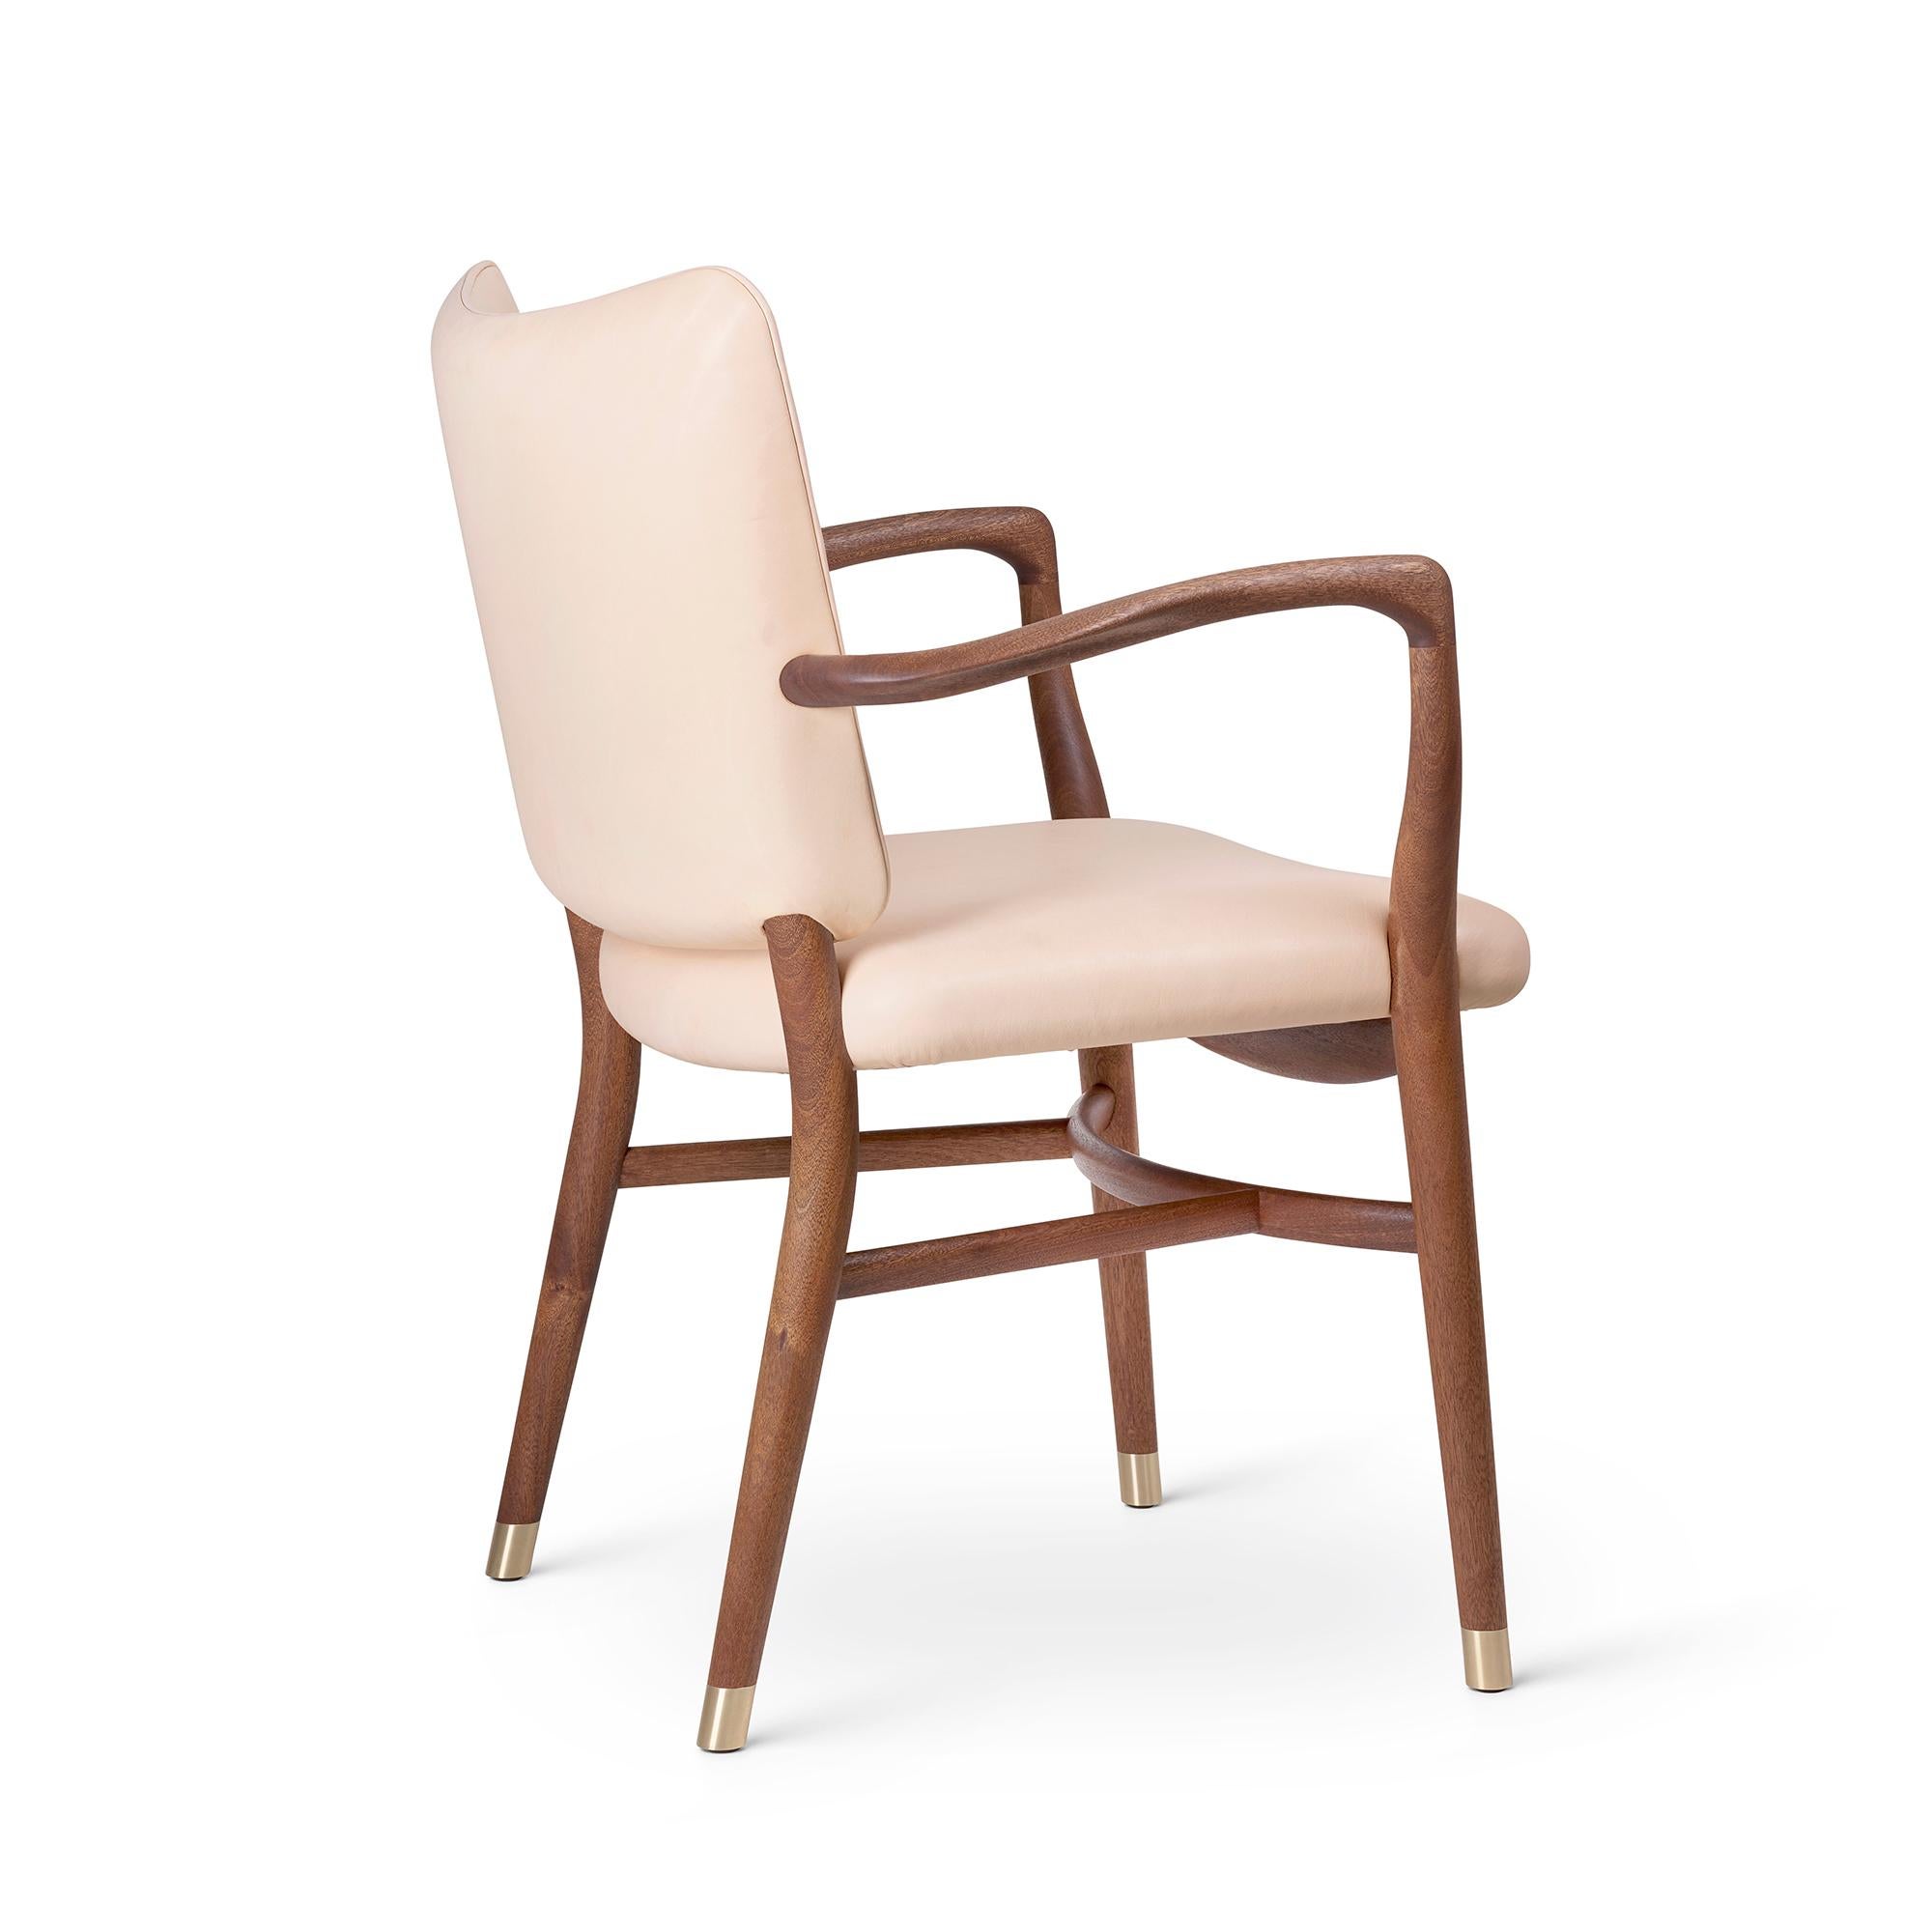 Contemporary Vilhelm Lauritzen 'VLA61' Chair in Mahogany and Leather for Carl Hansen & Son For Sale